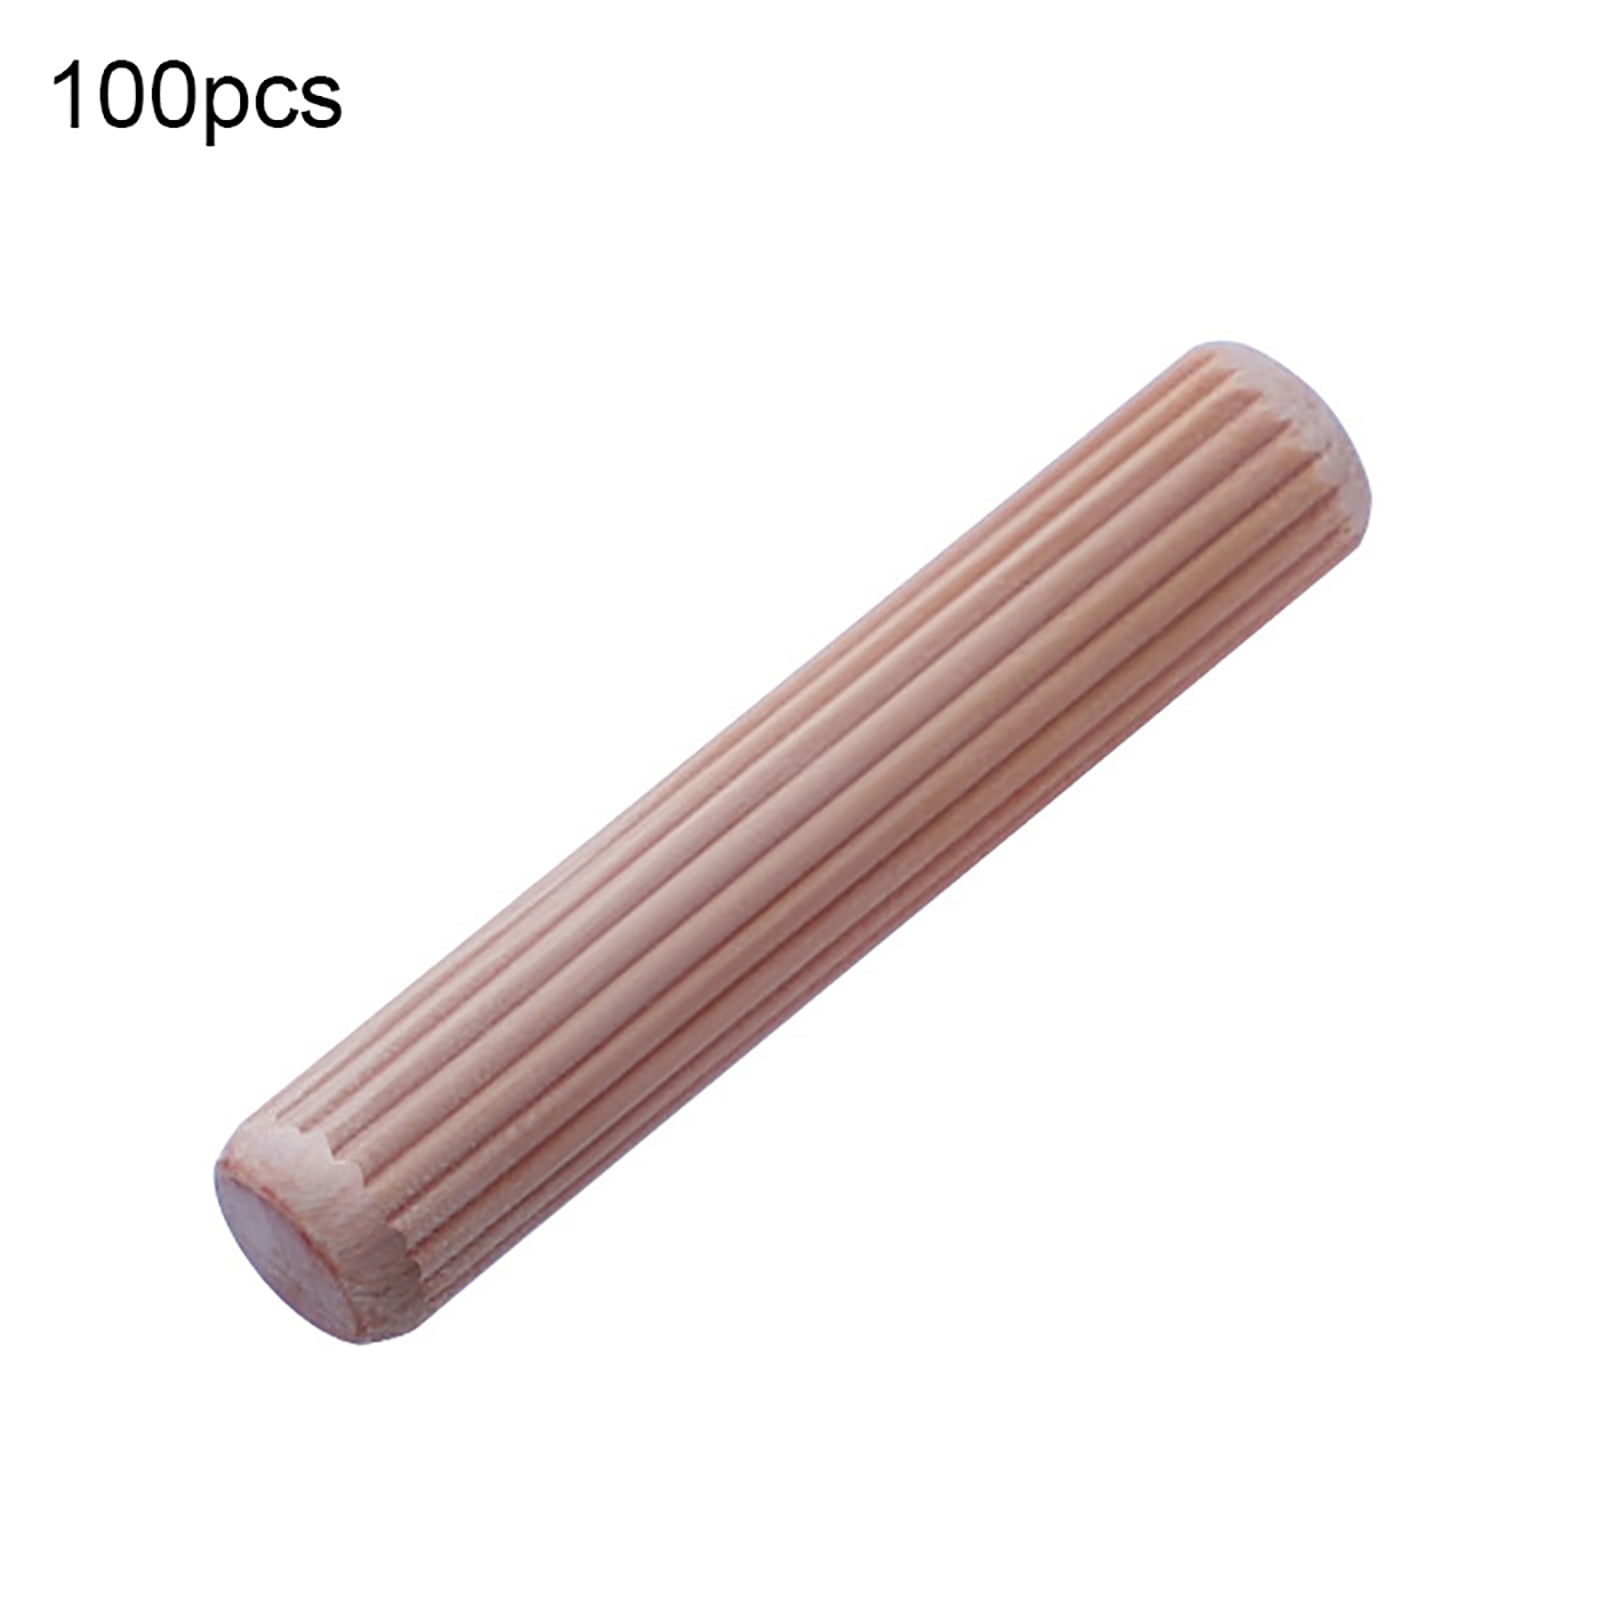 Joinery Furniture Hardwood Fluted Grooved Plugs 8mm x 40mm Wooden Dowel Pins 